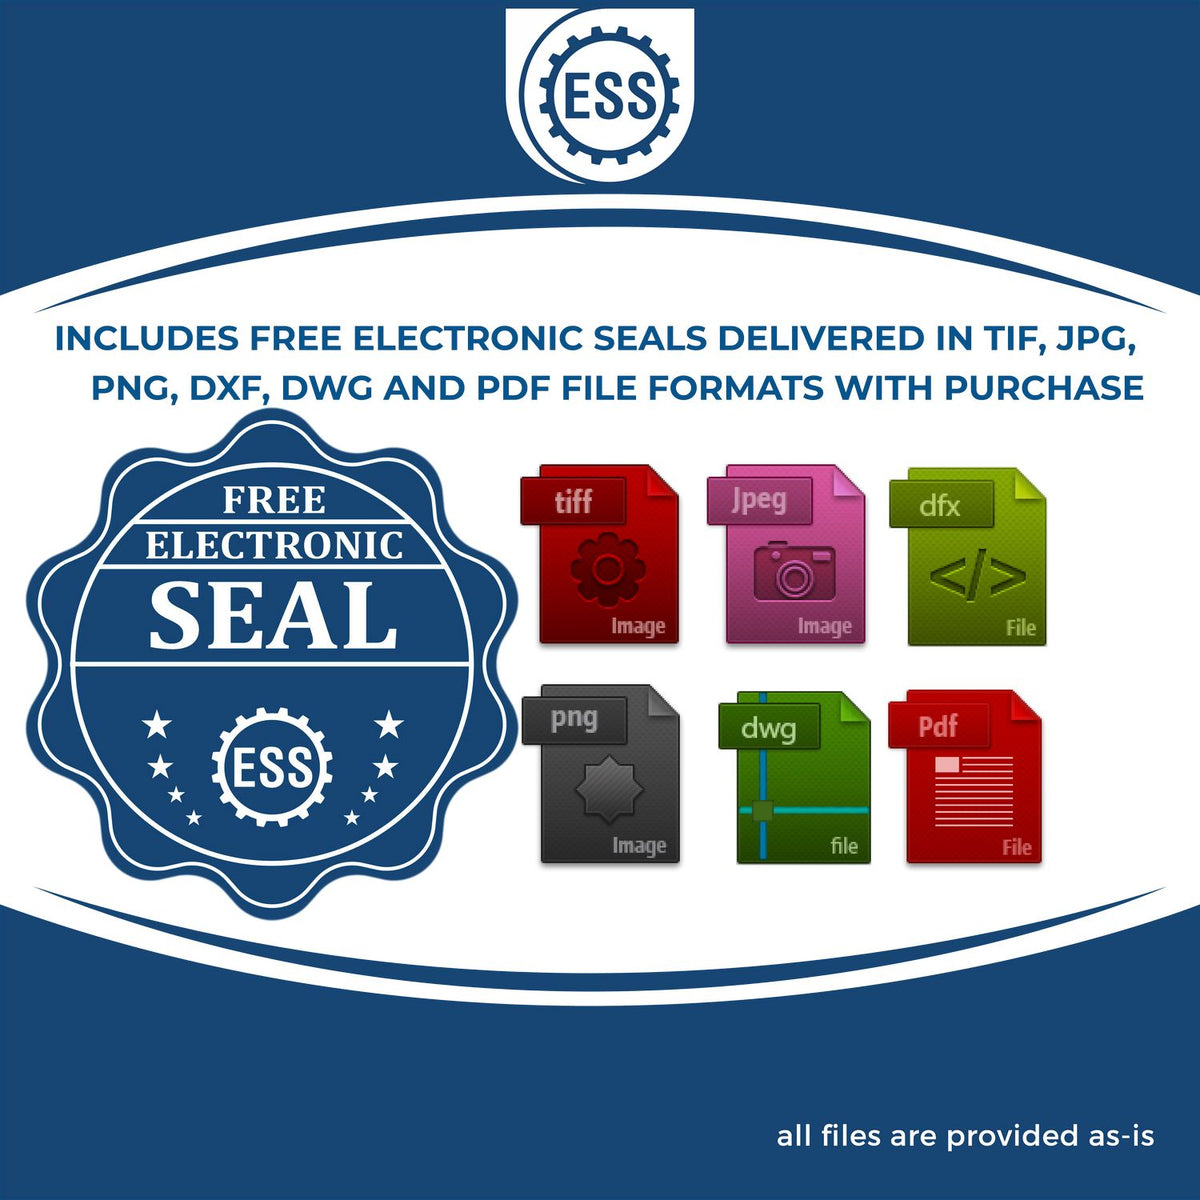 An infographic for the free electronic seal for the Hybrid Arizona Geologist Seal illustrating the different file type icons such as DXF, DWG, TIF, JPG and PNG.